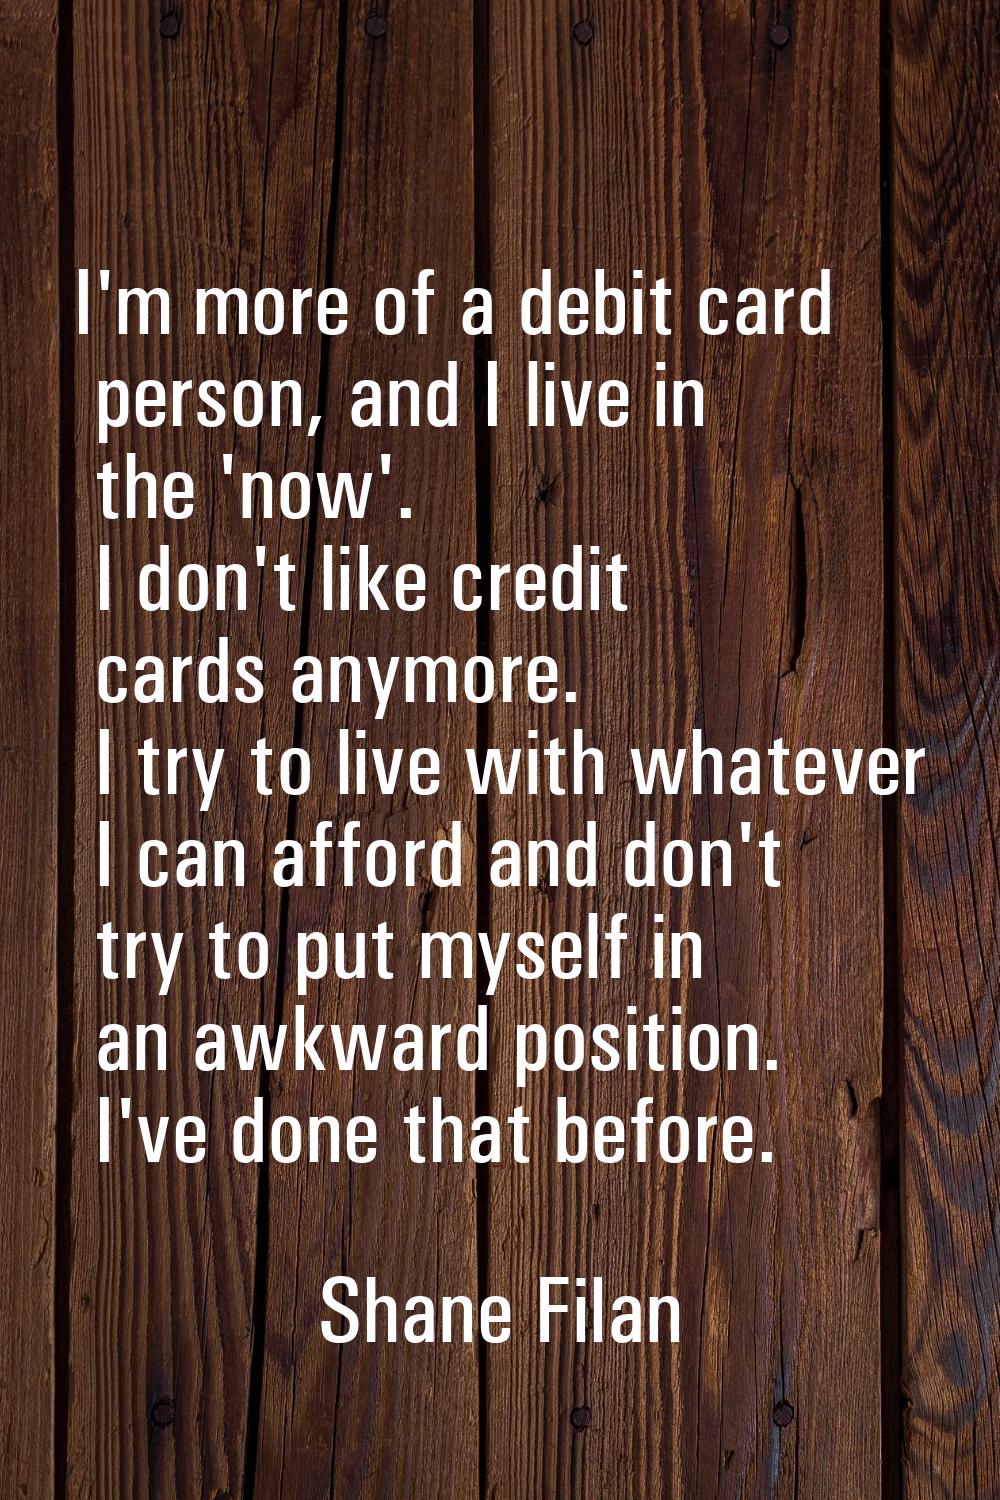 I'm more of a debit card person, and I live in the 'now'. I don't like credit cards anymore. I try 